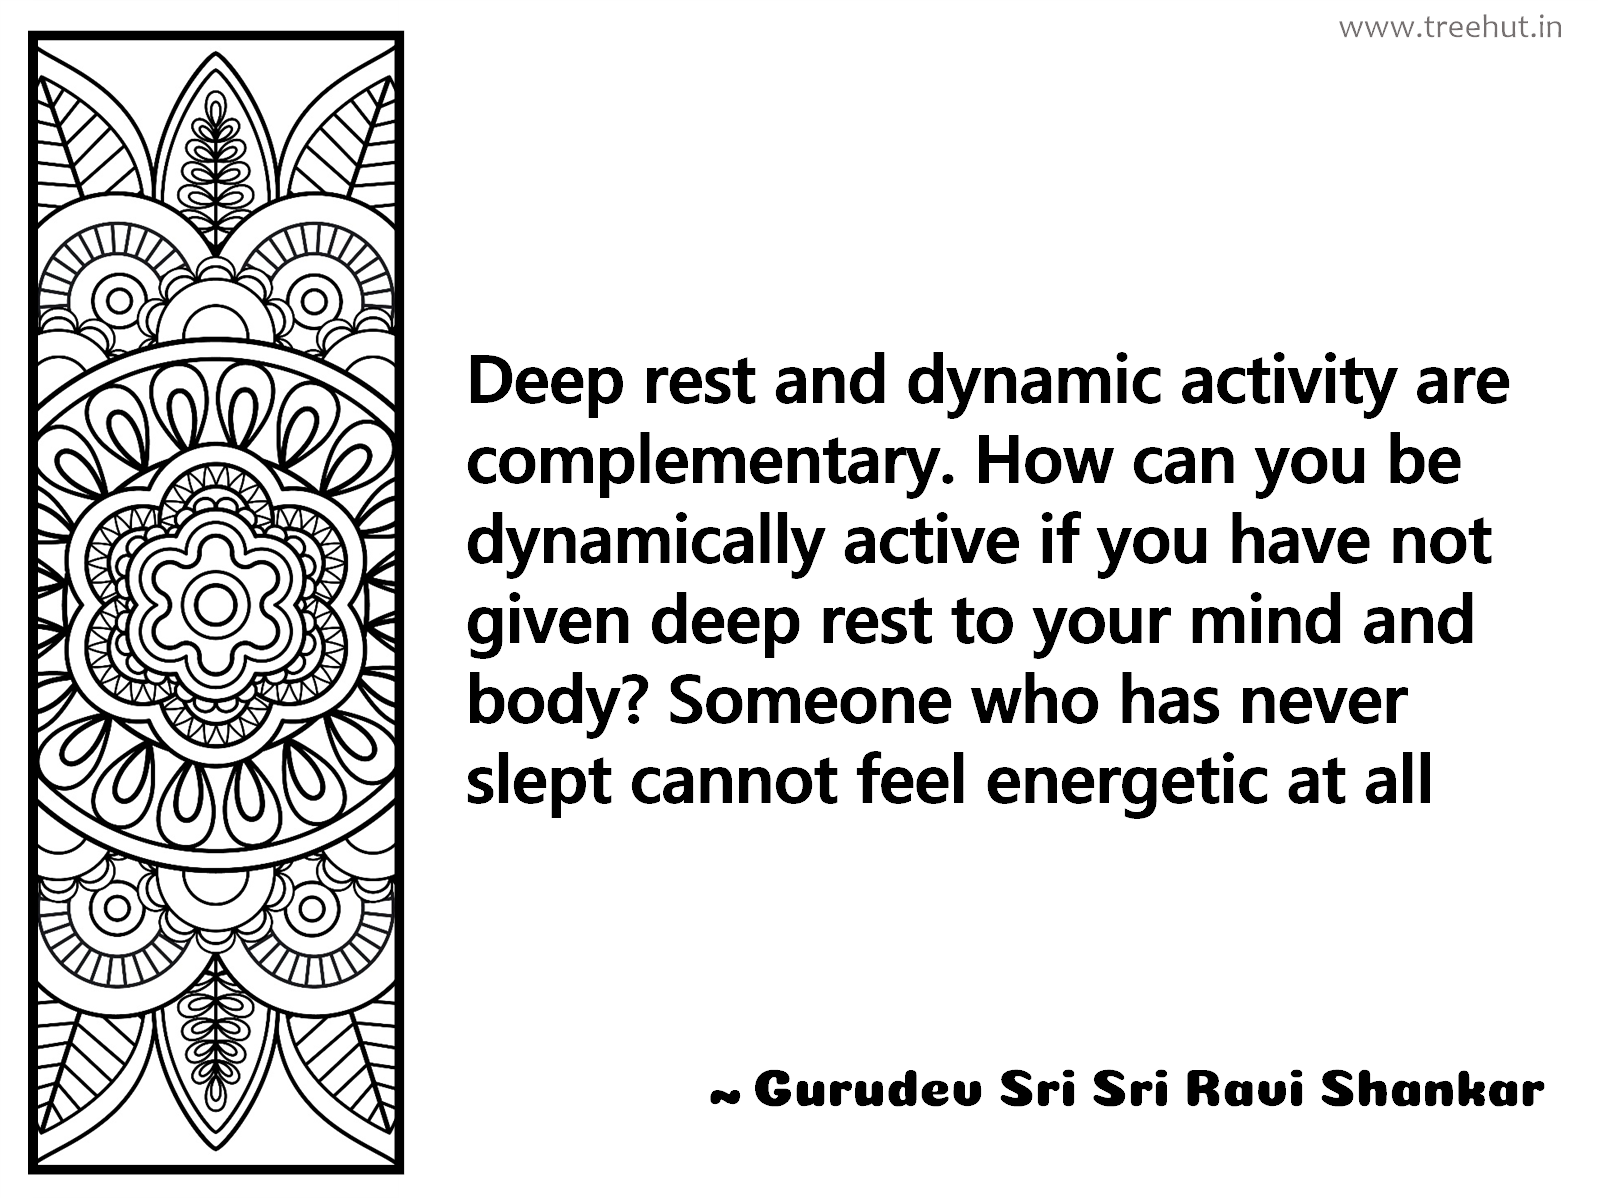 Deep rest and dynamic activity are complementary. How can you be dynamically active if you have not given deep rest to your mind and body? Someone who has never slept cannot feel energetic at all Inspirational Quote by Gurudev Sri Sri Ravi Shankar, coloring pages